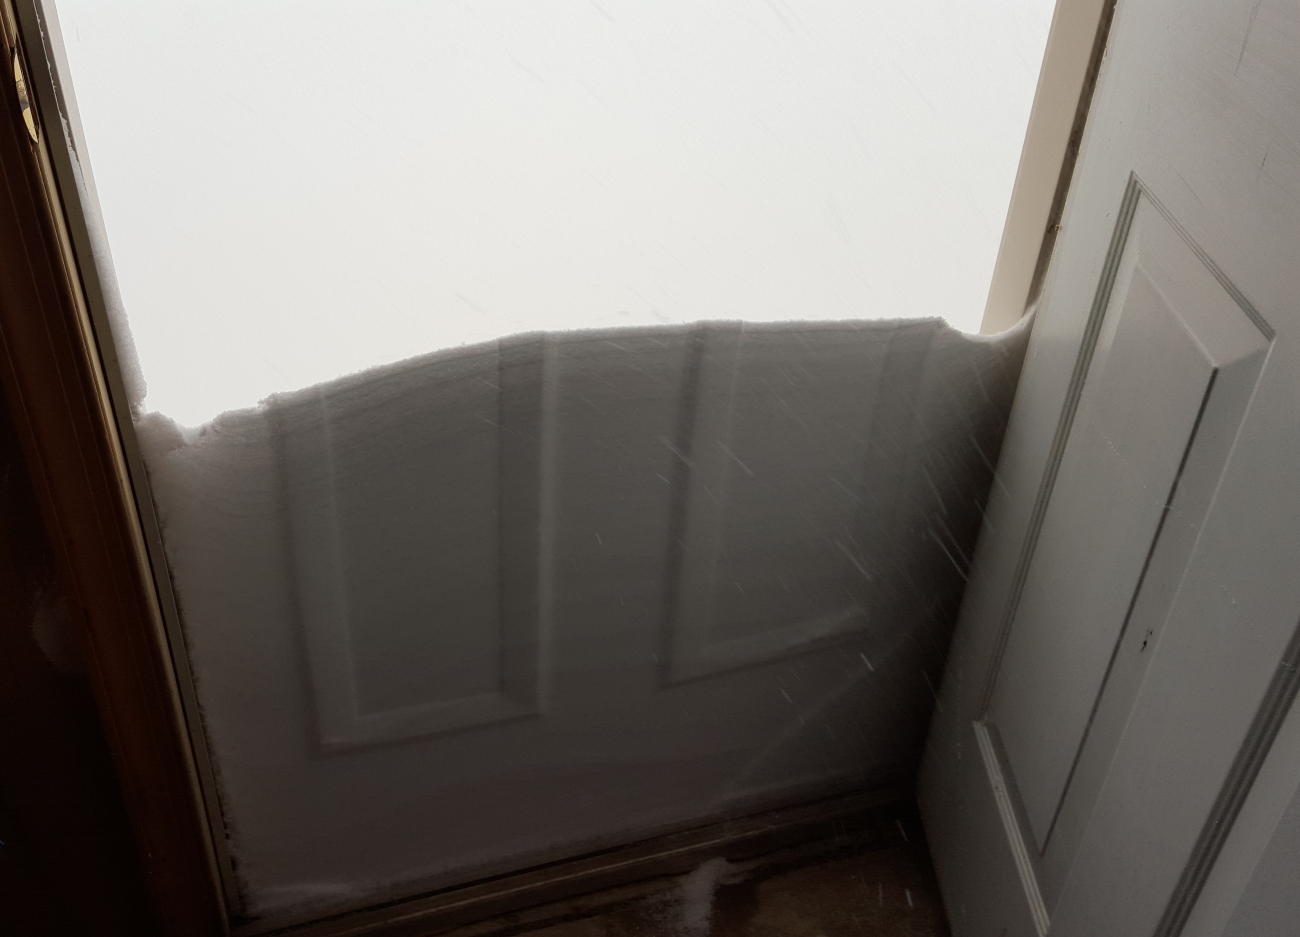 Snow drifted against the front door molded by the pattern on the door